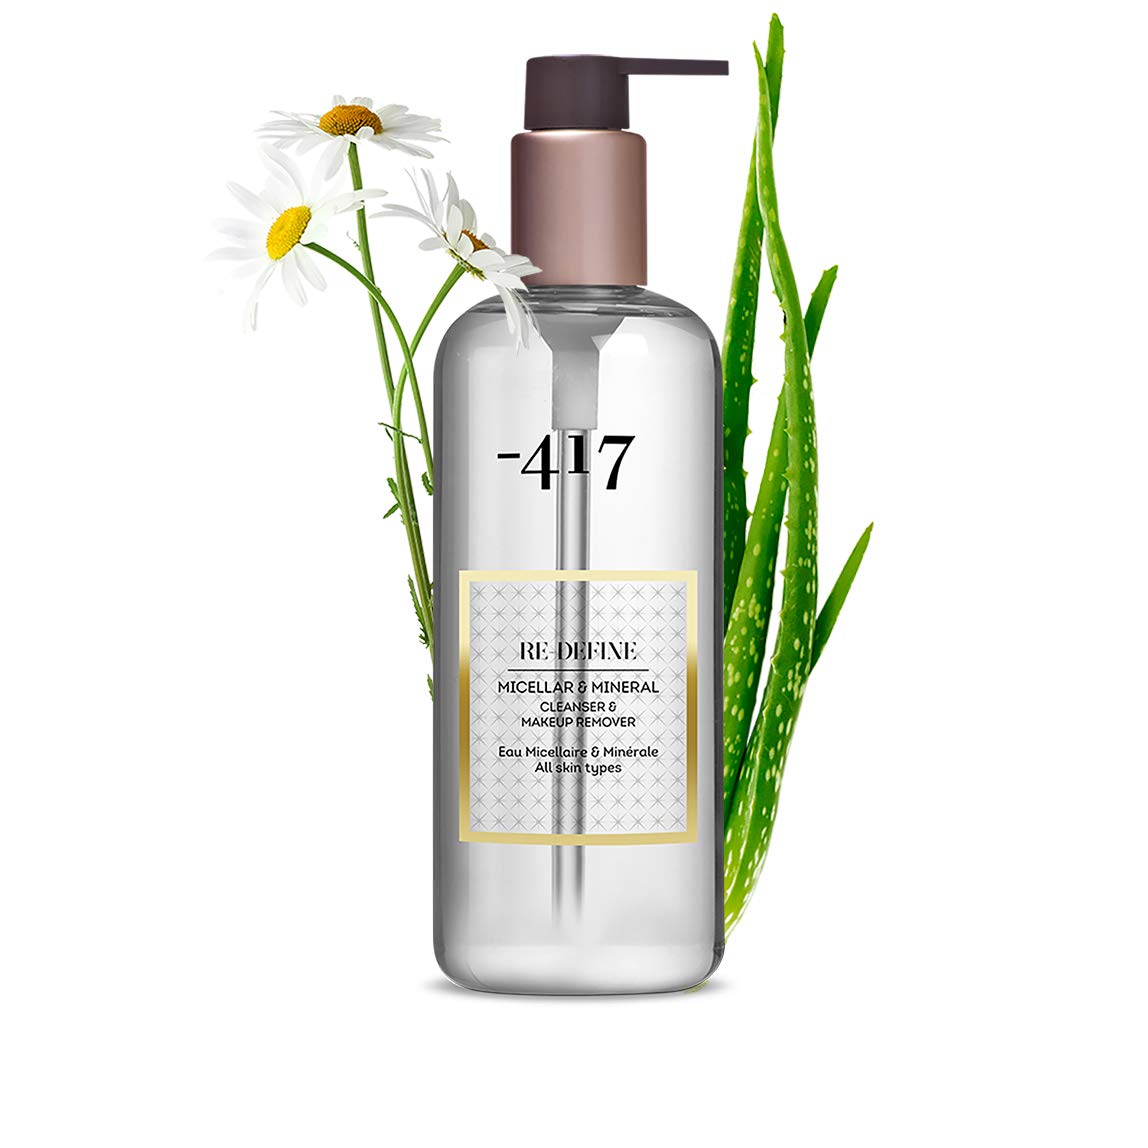 -417 Dead Sea Cosmetics  Micellar & Mineral Cleanser & Make Up Remover - Perfect for Makeup Removal